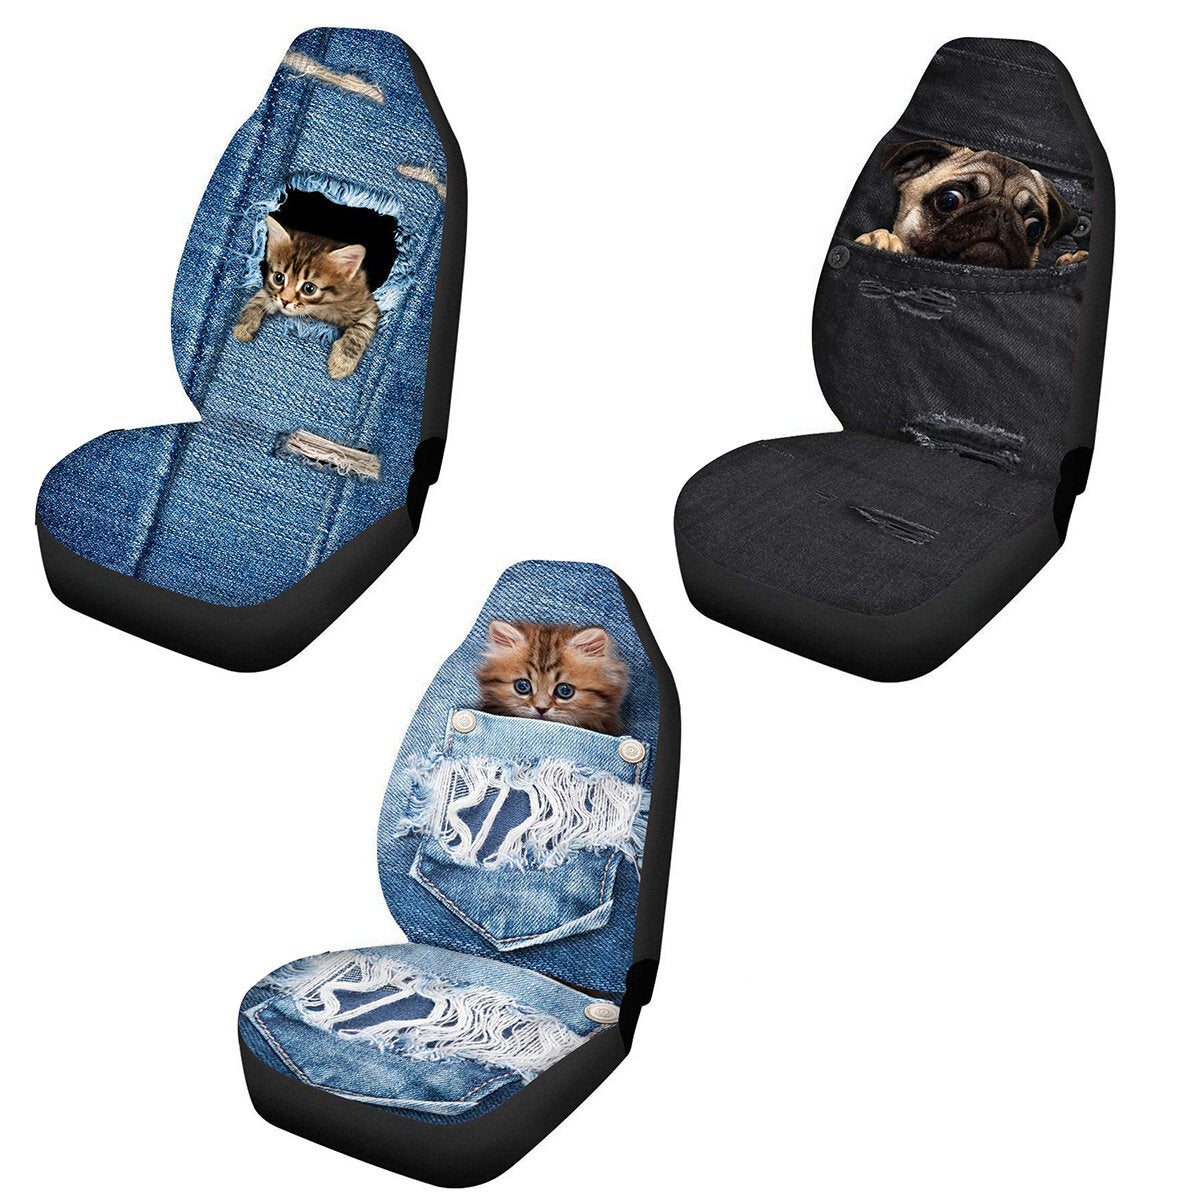 Car Front Seat Cover Protector Cushion Cat Dog Printed